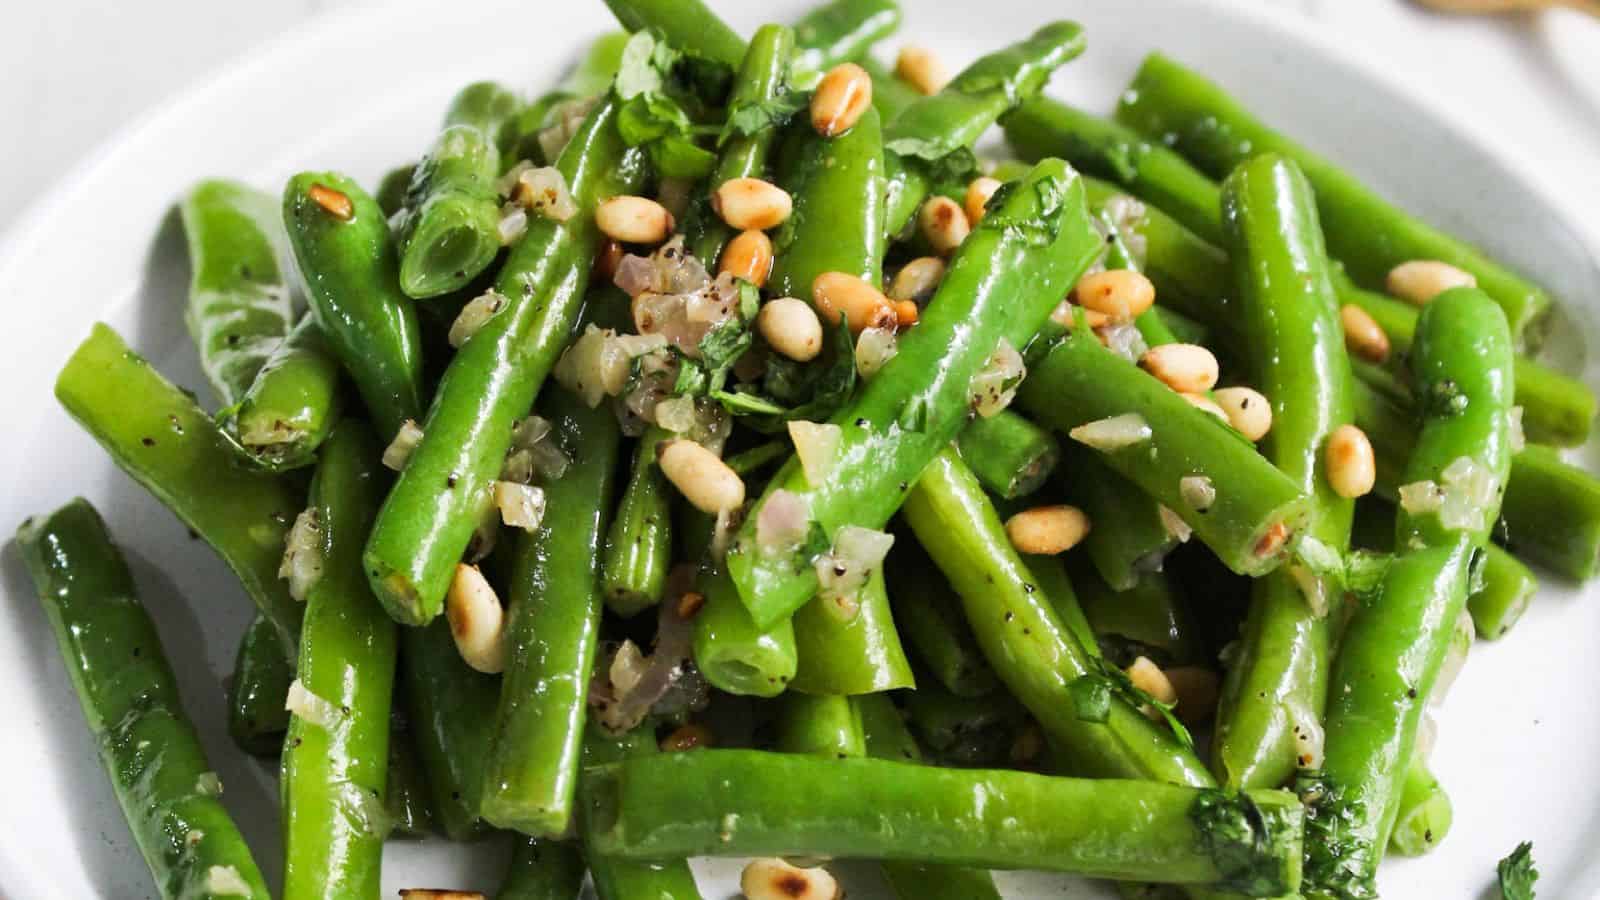 Green beans with pine nuts on a plate.